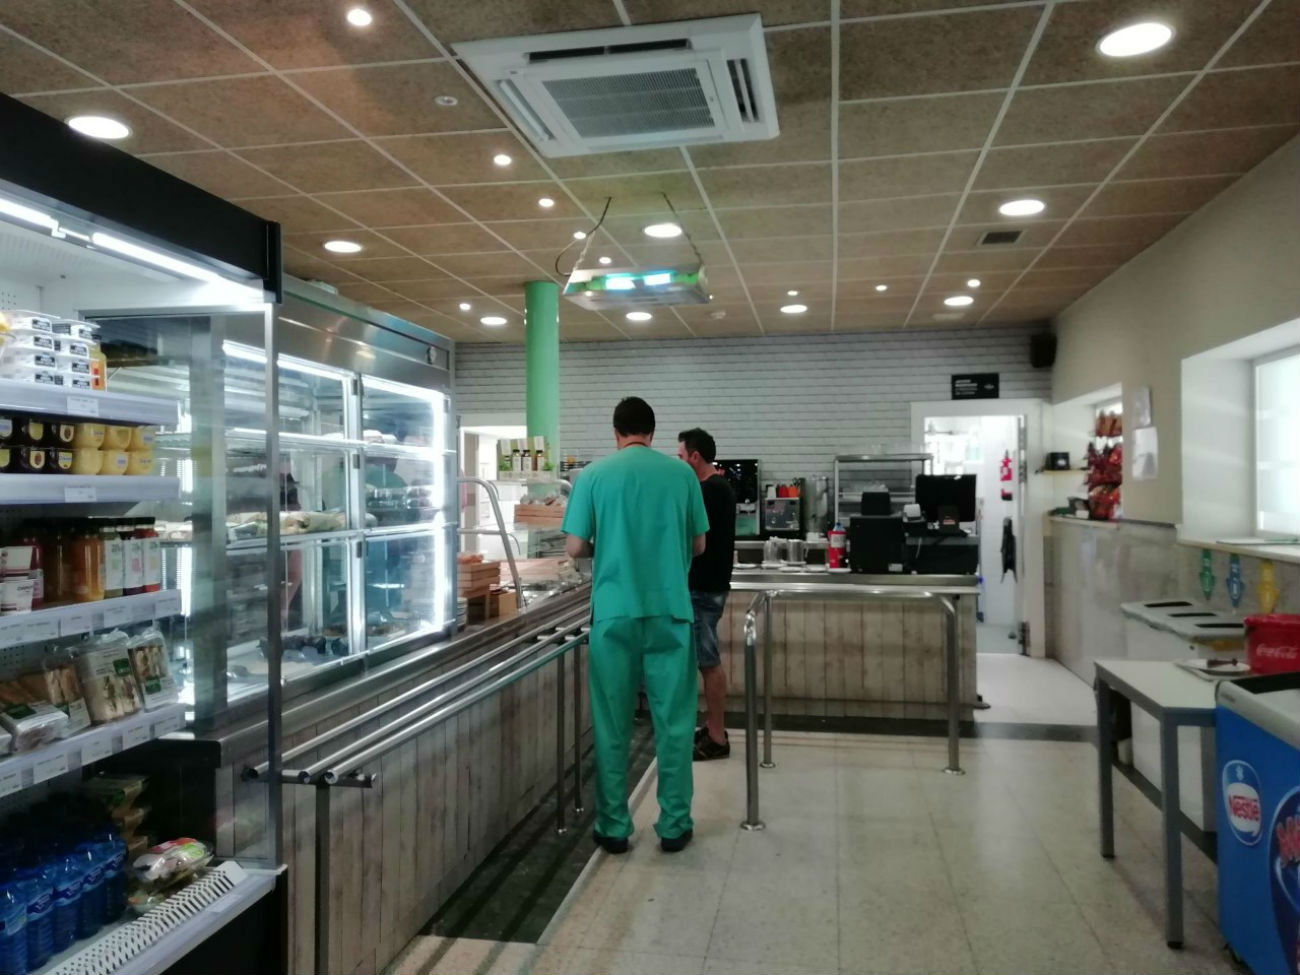 Hospital El Escorial eliminates plastic from water bottles in the cafeteria  | Madrid's community